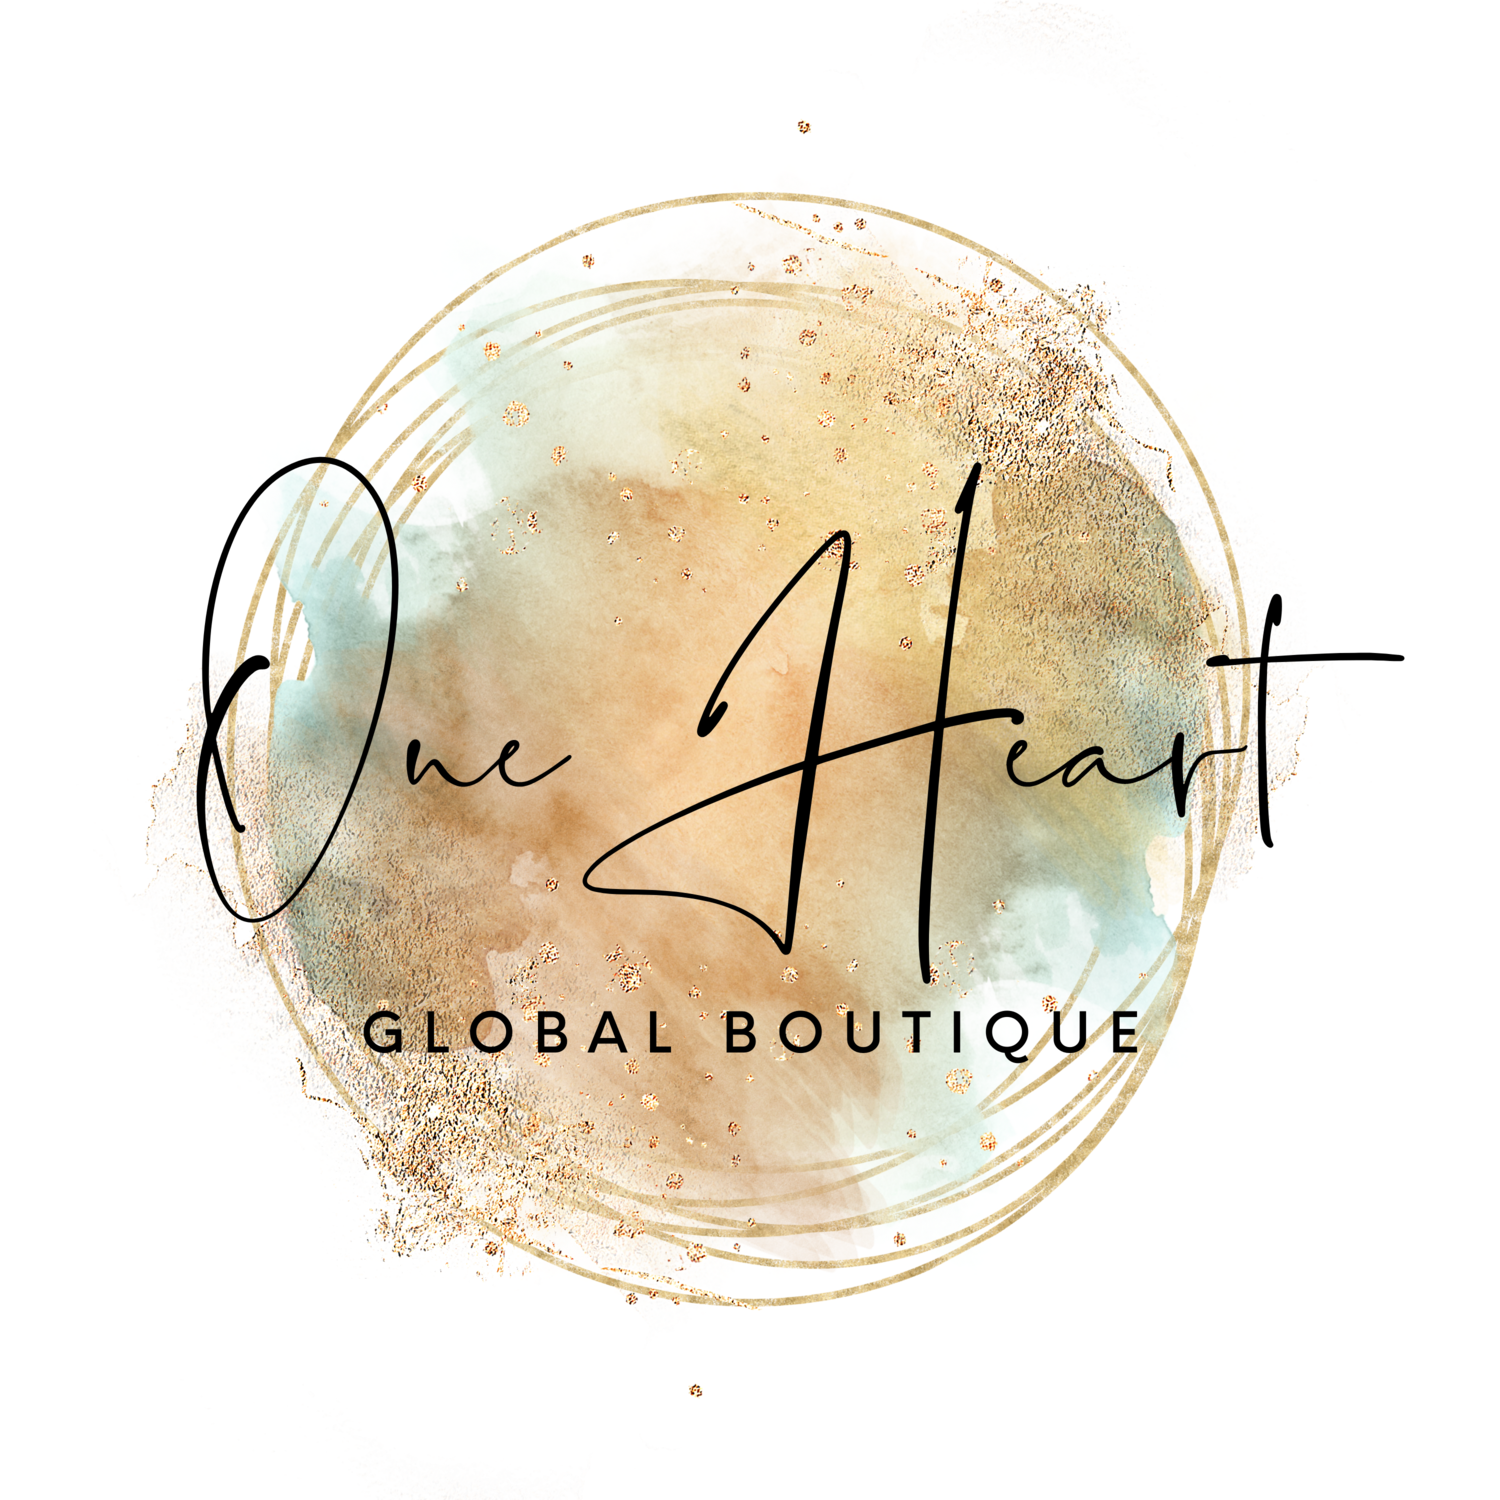 SHOP — One Heart Global Boutique